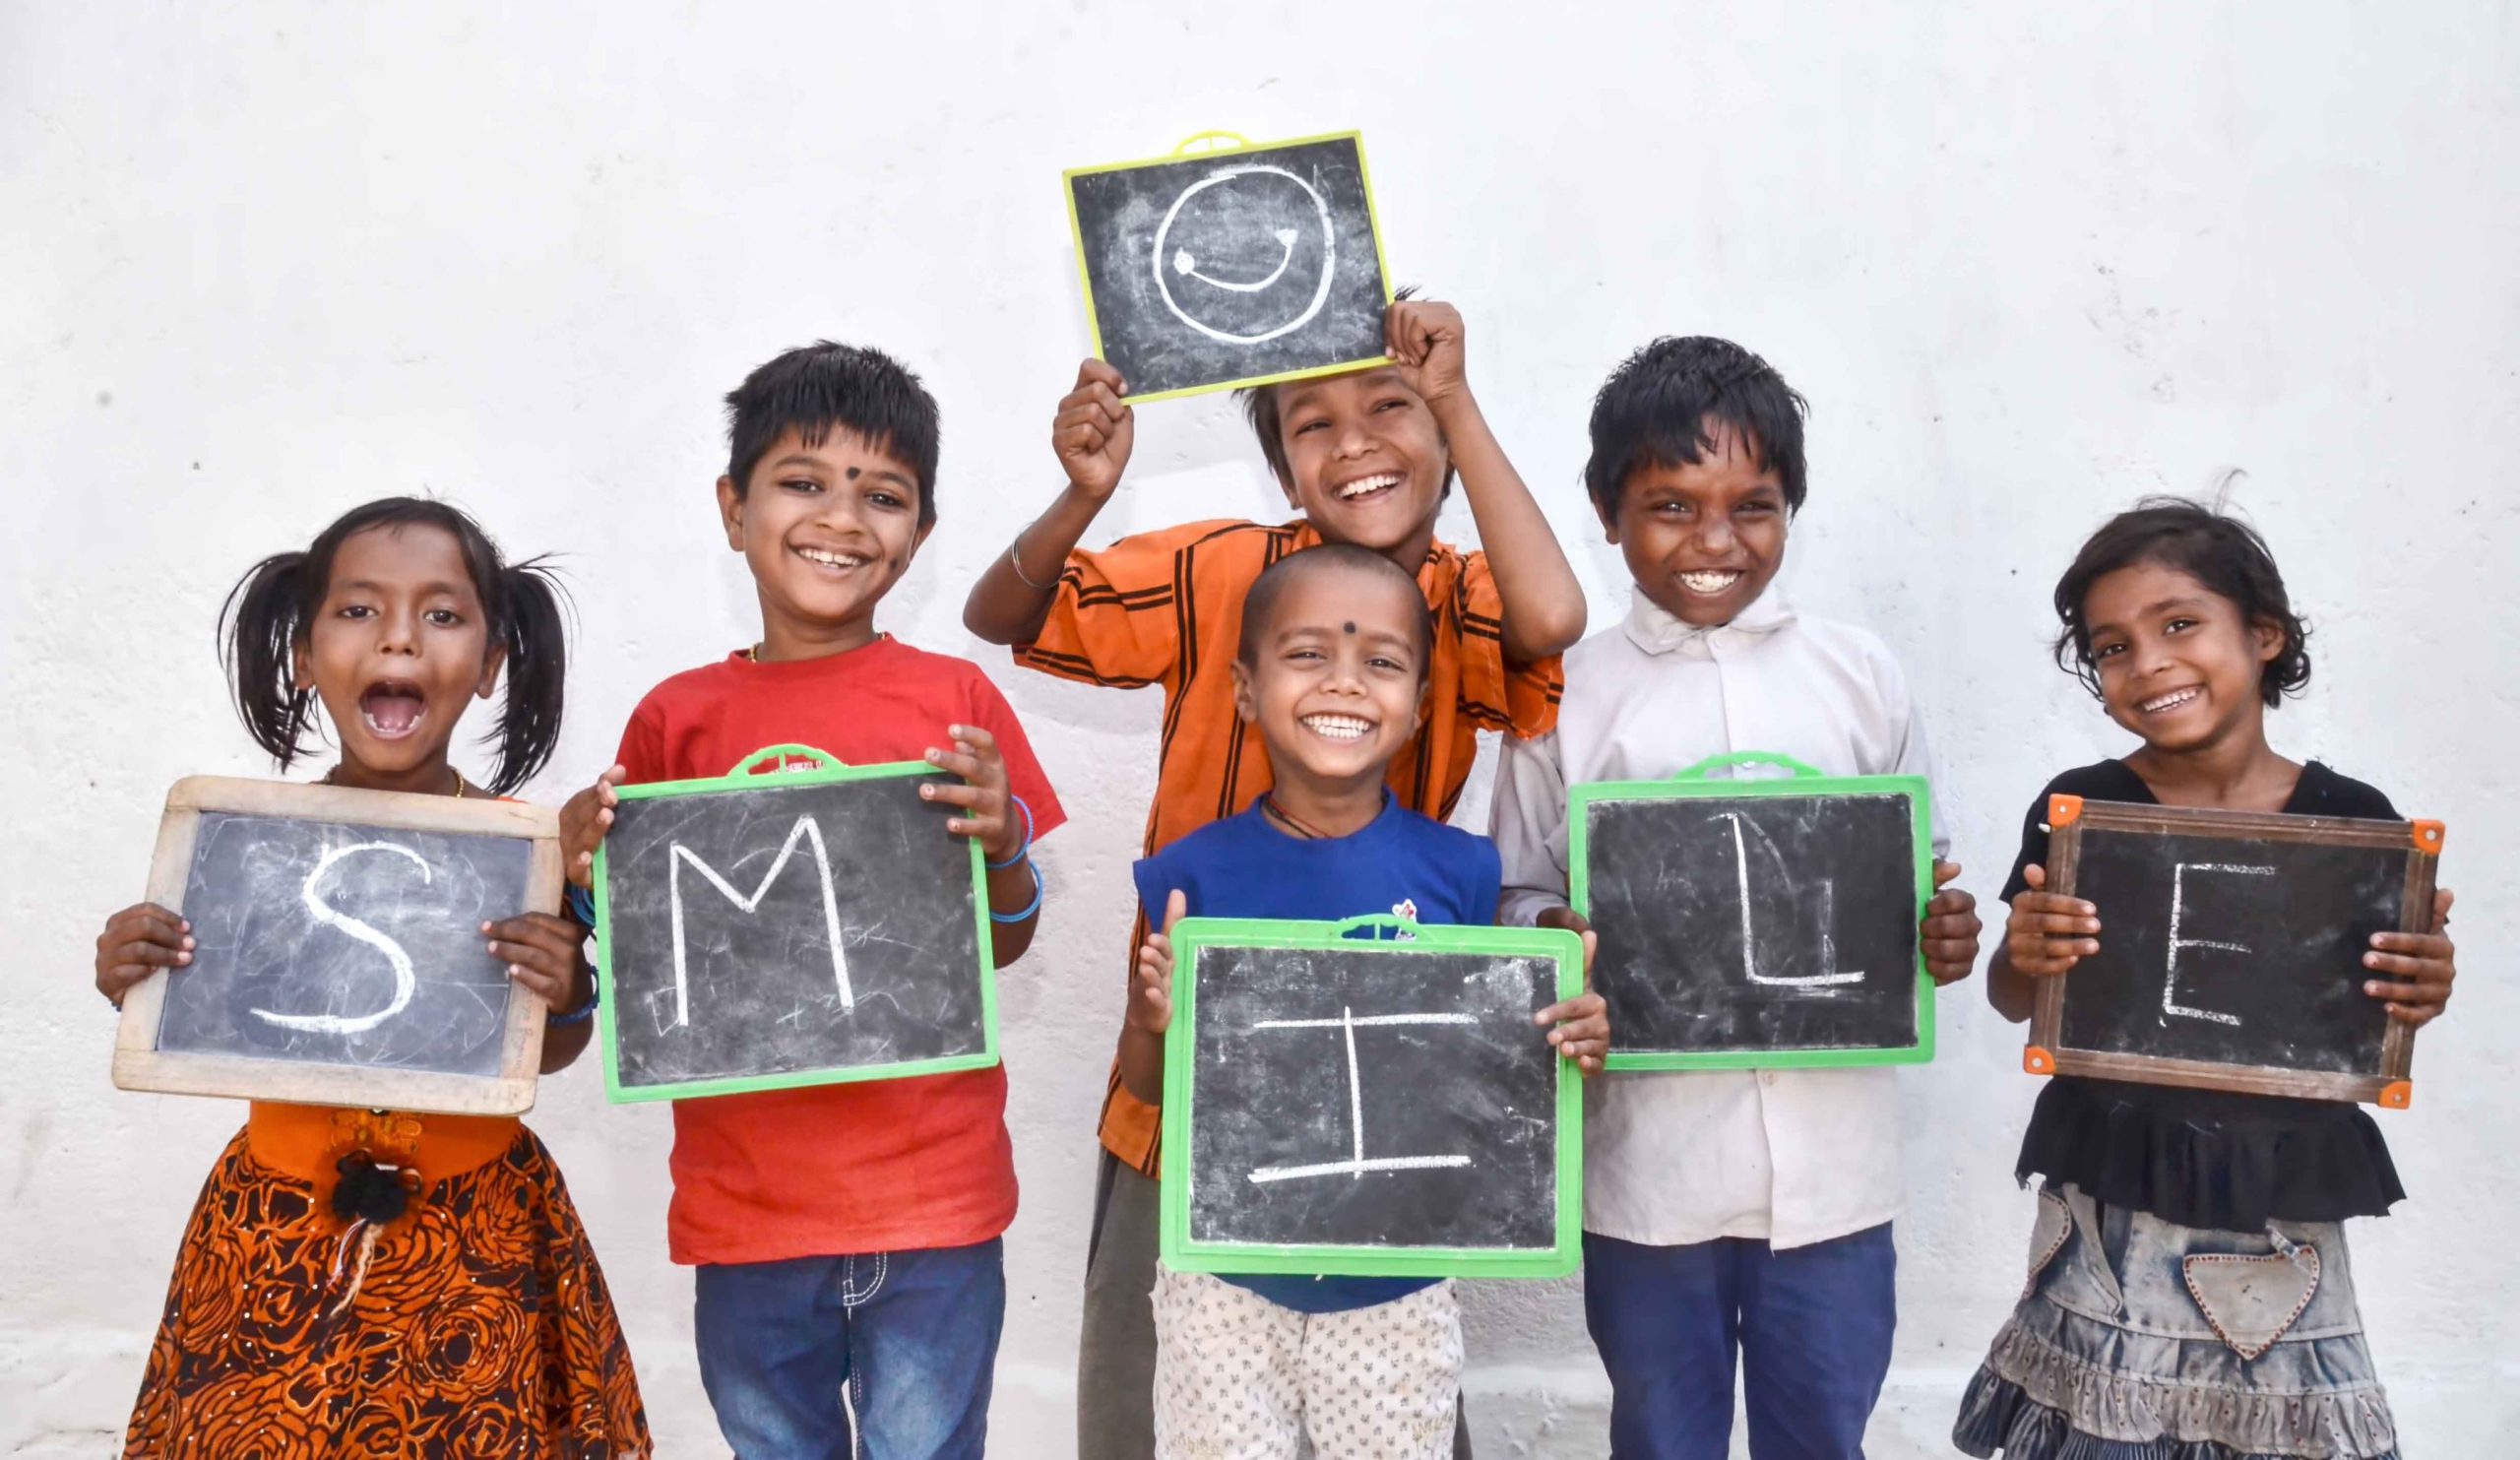 Smile Foundation: transforming lives through civic-driven change